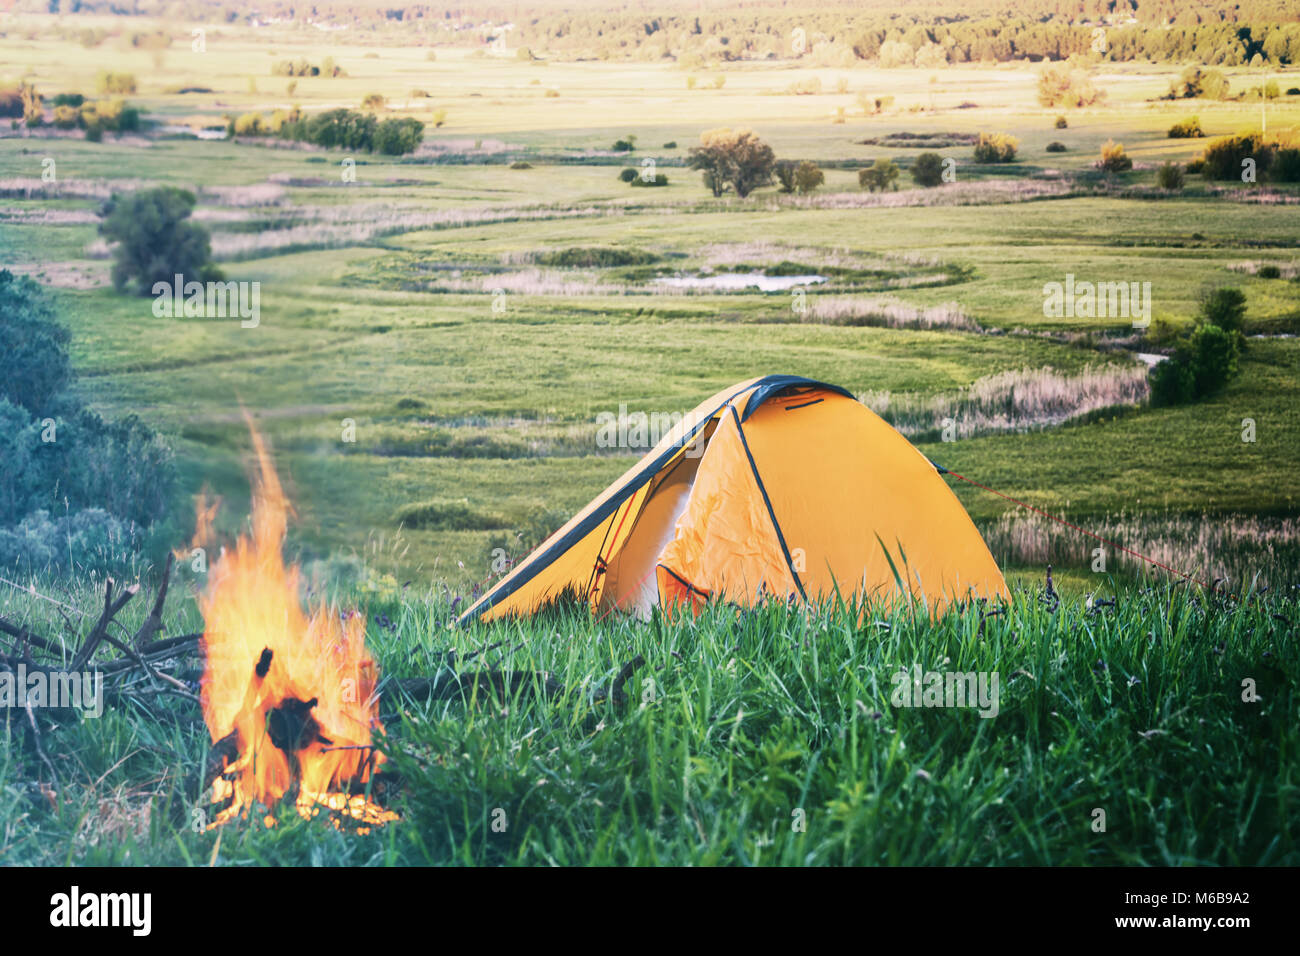 Orange tent with fire in field with green grass Stock Photo